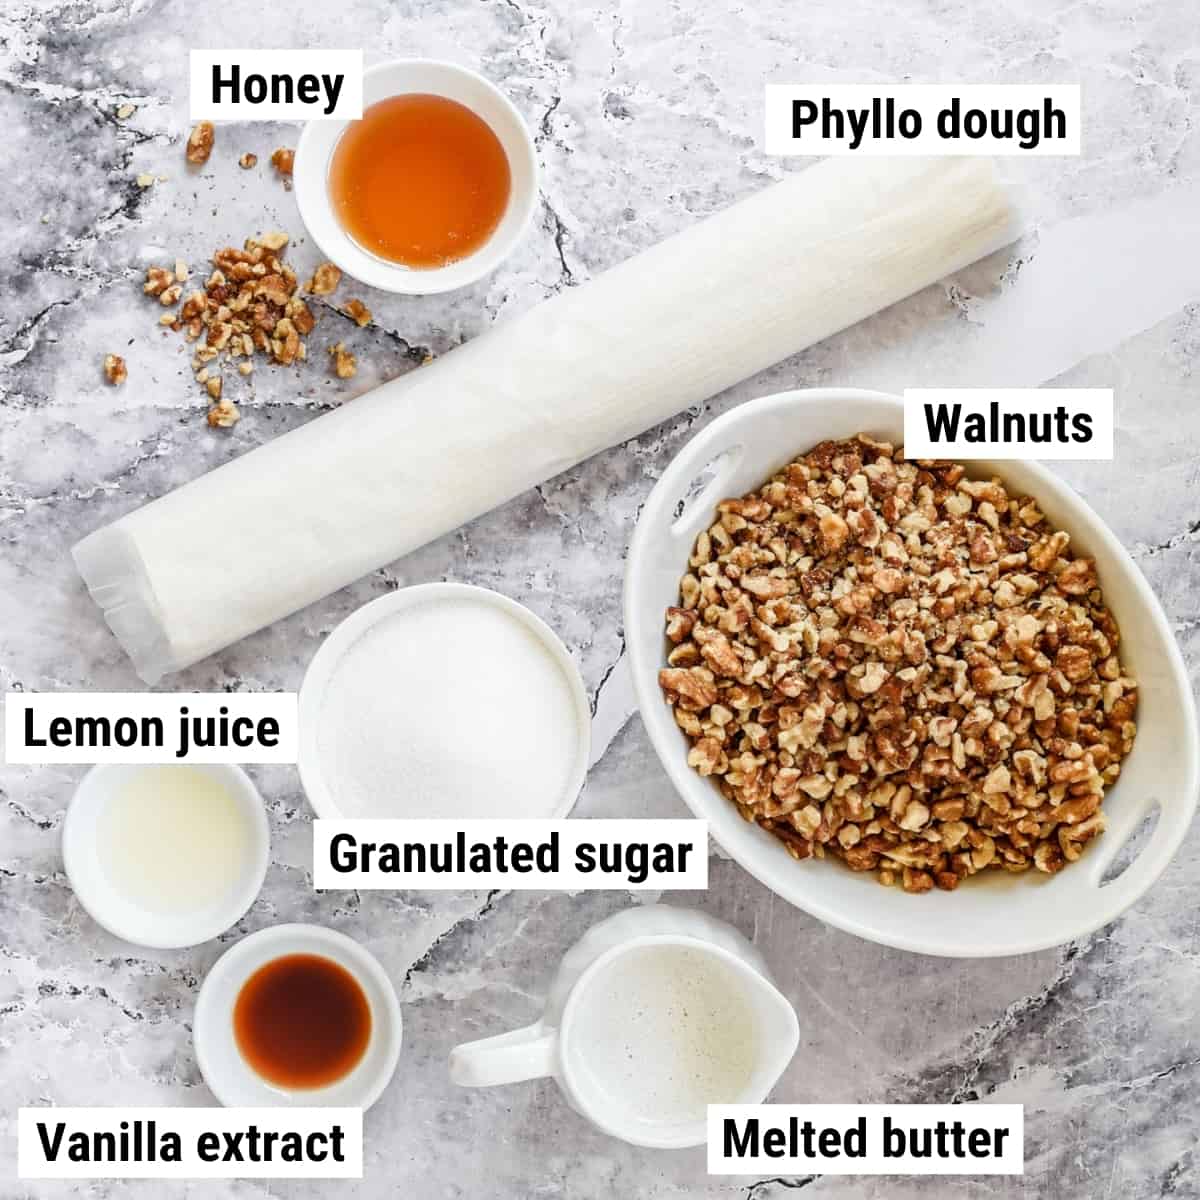 The ingredients to make Greek baklava spread out on a table.